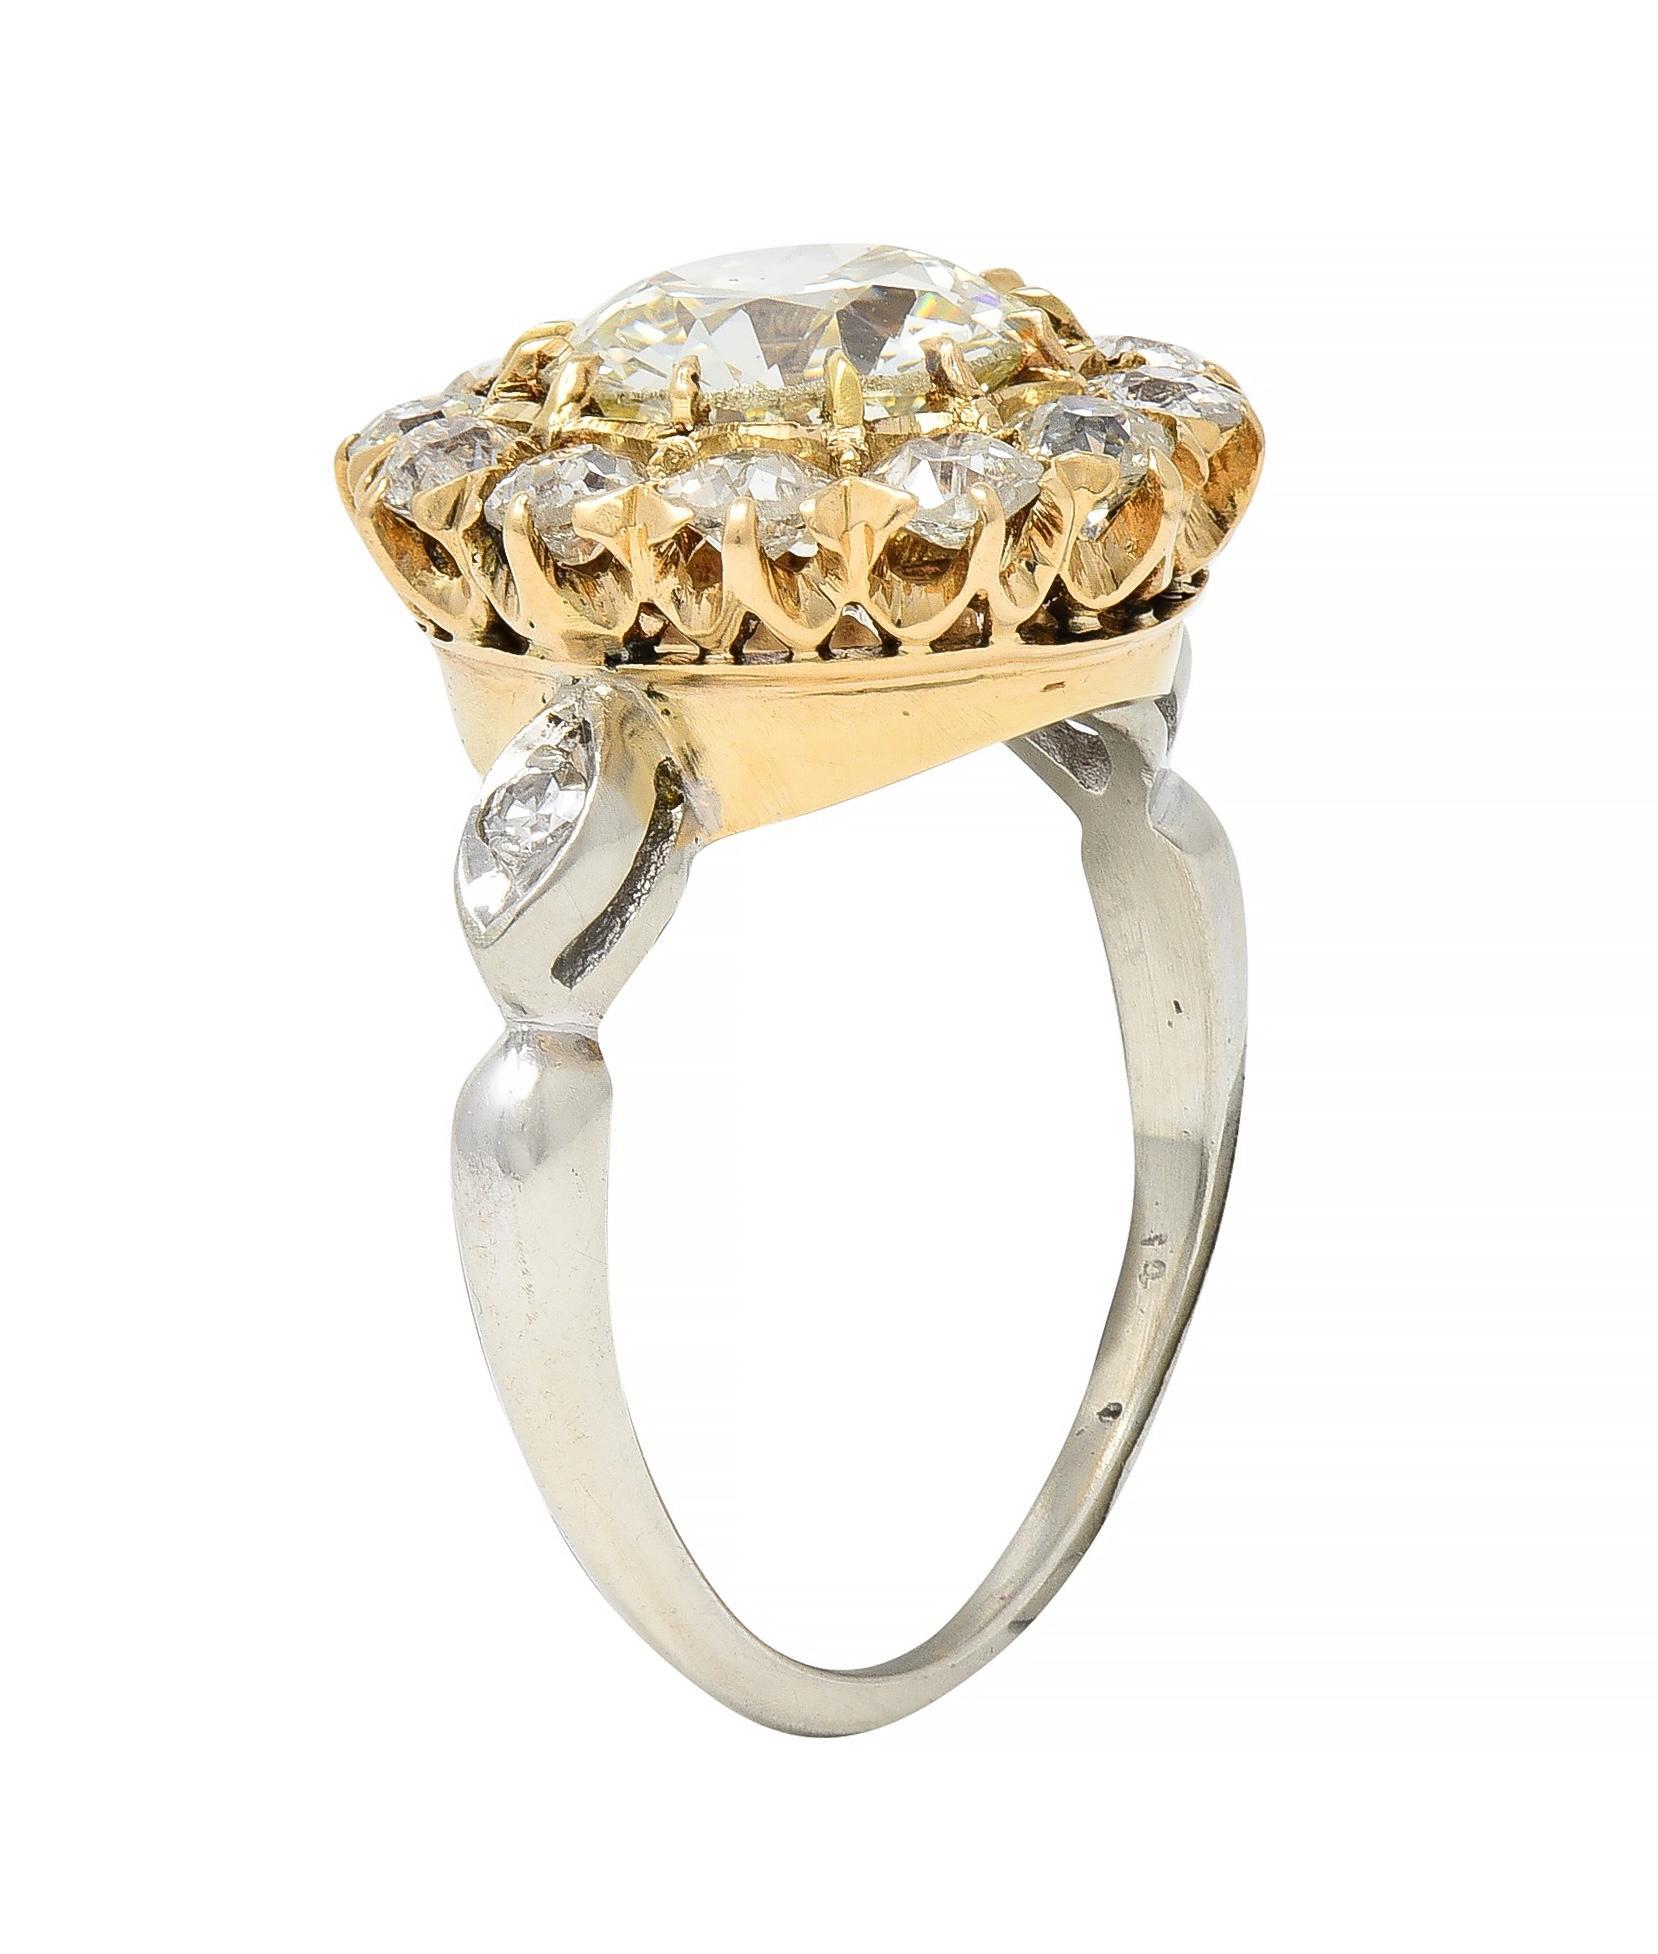 Art Deco 2.95 CTW Old European Cut Diamond 14 Karat Gold Cluster Ring GIA In Excellent Condition For Sale In Philadelphia, PA